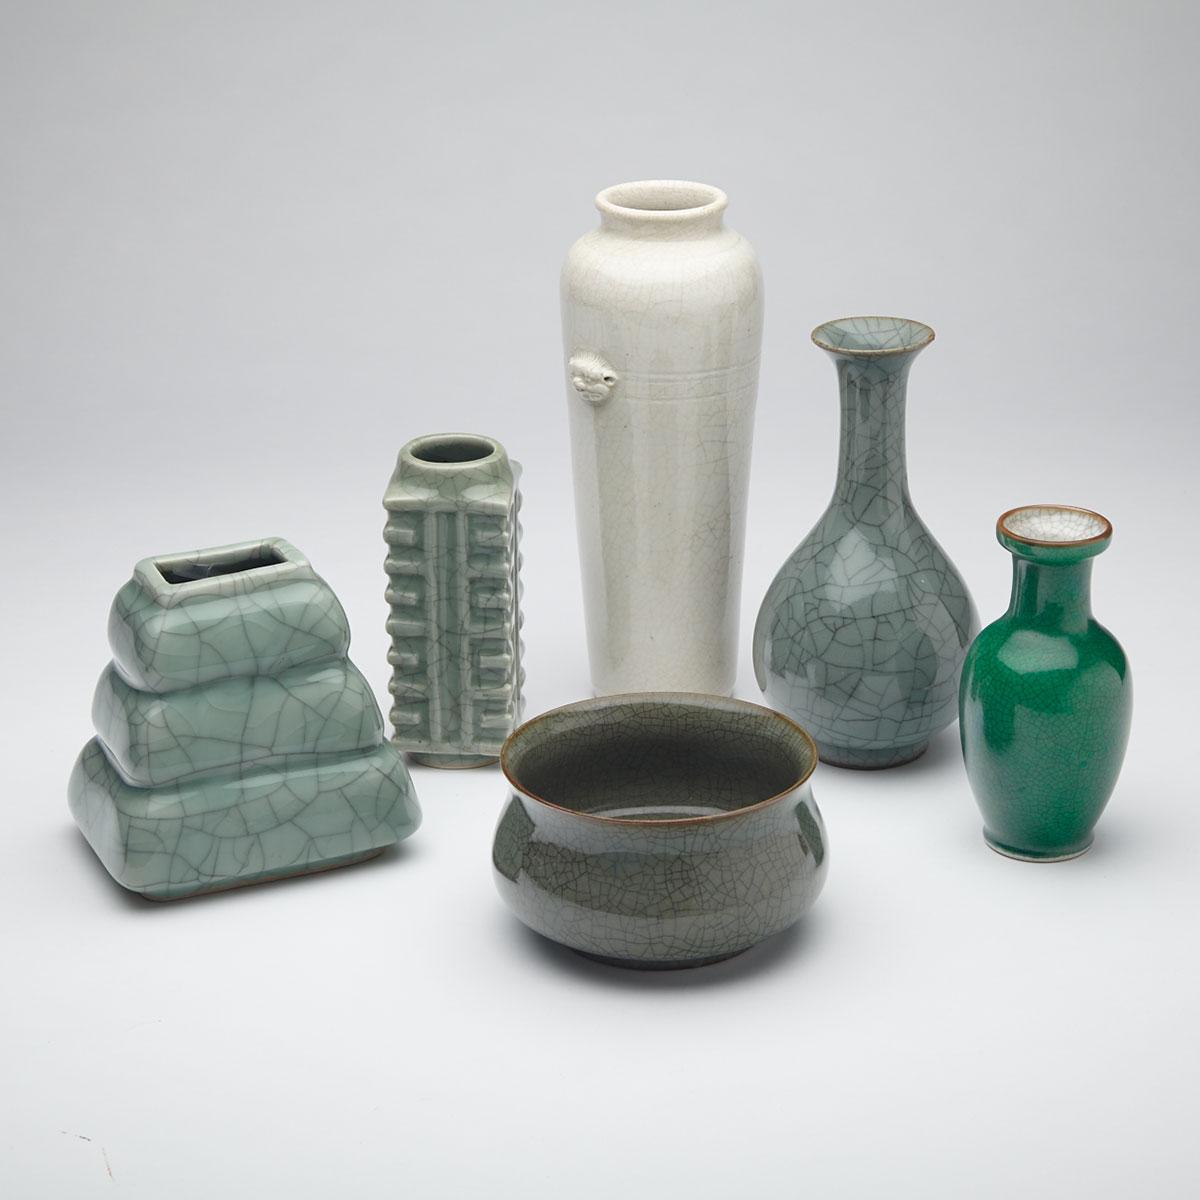 Group of Six Crackle Glazed Porcelain Wares, 19th/20th Century